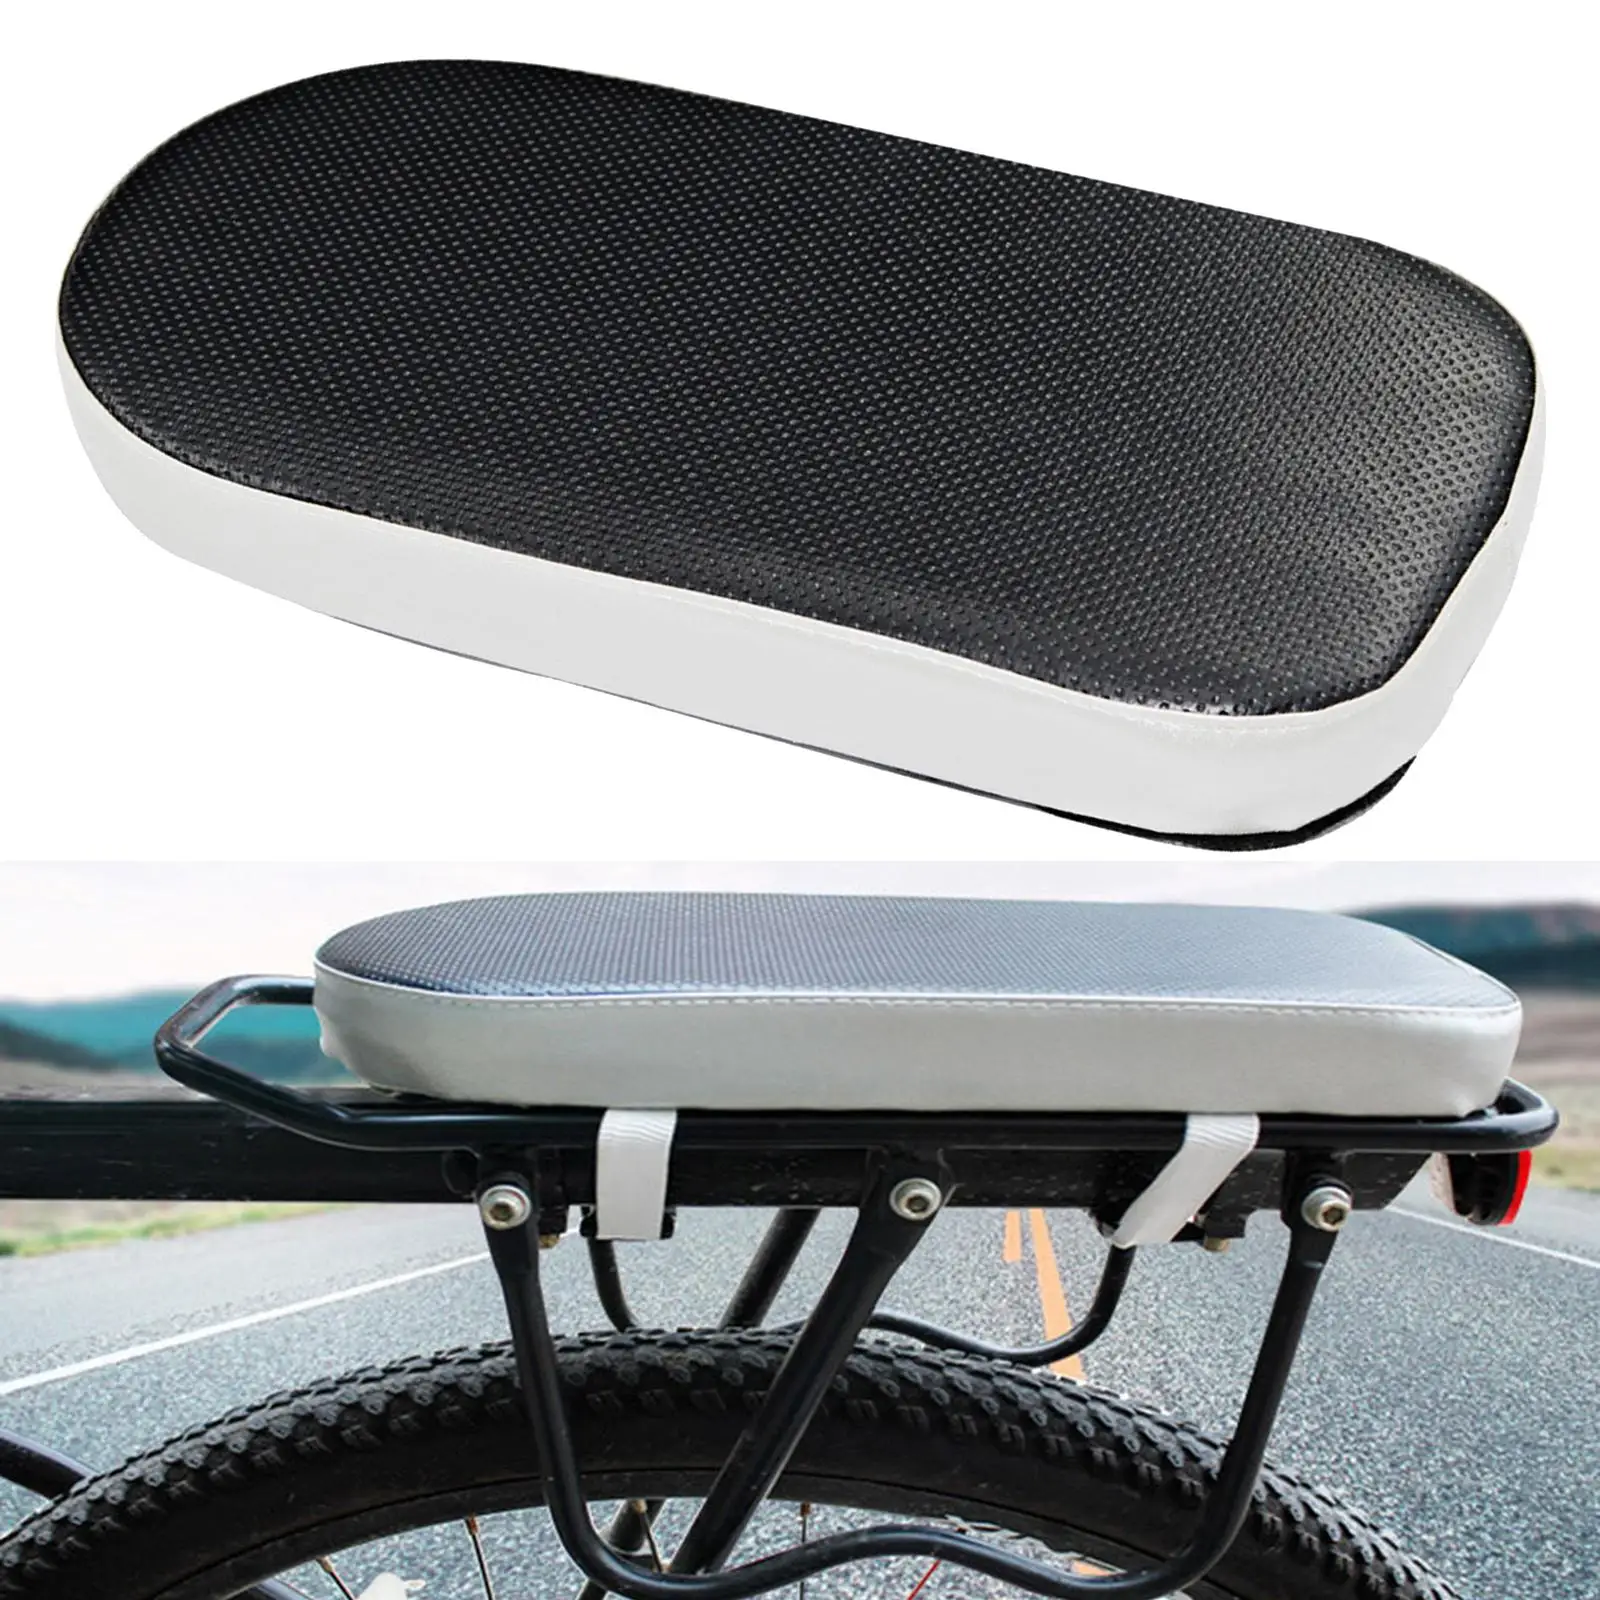 Bike Bicycle Manned Cushion Extra Comfort Pad Breathable Wide Big Soft Back Seat